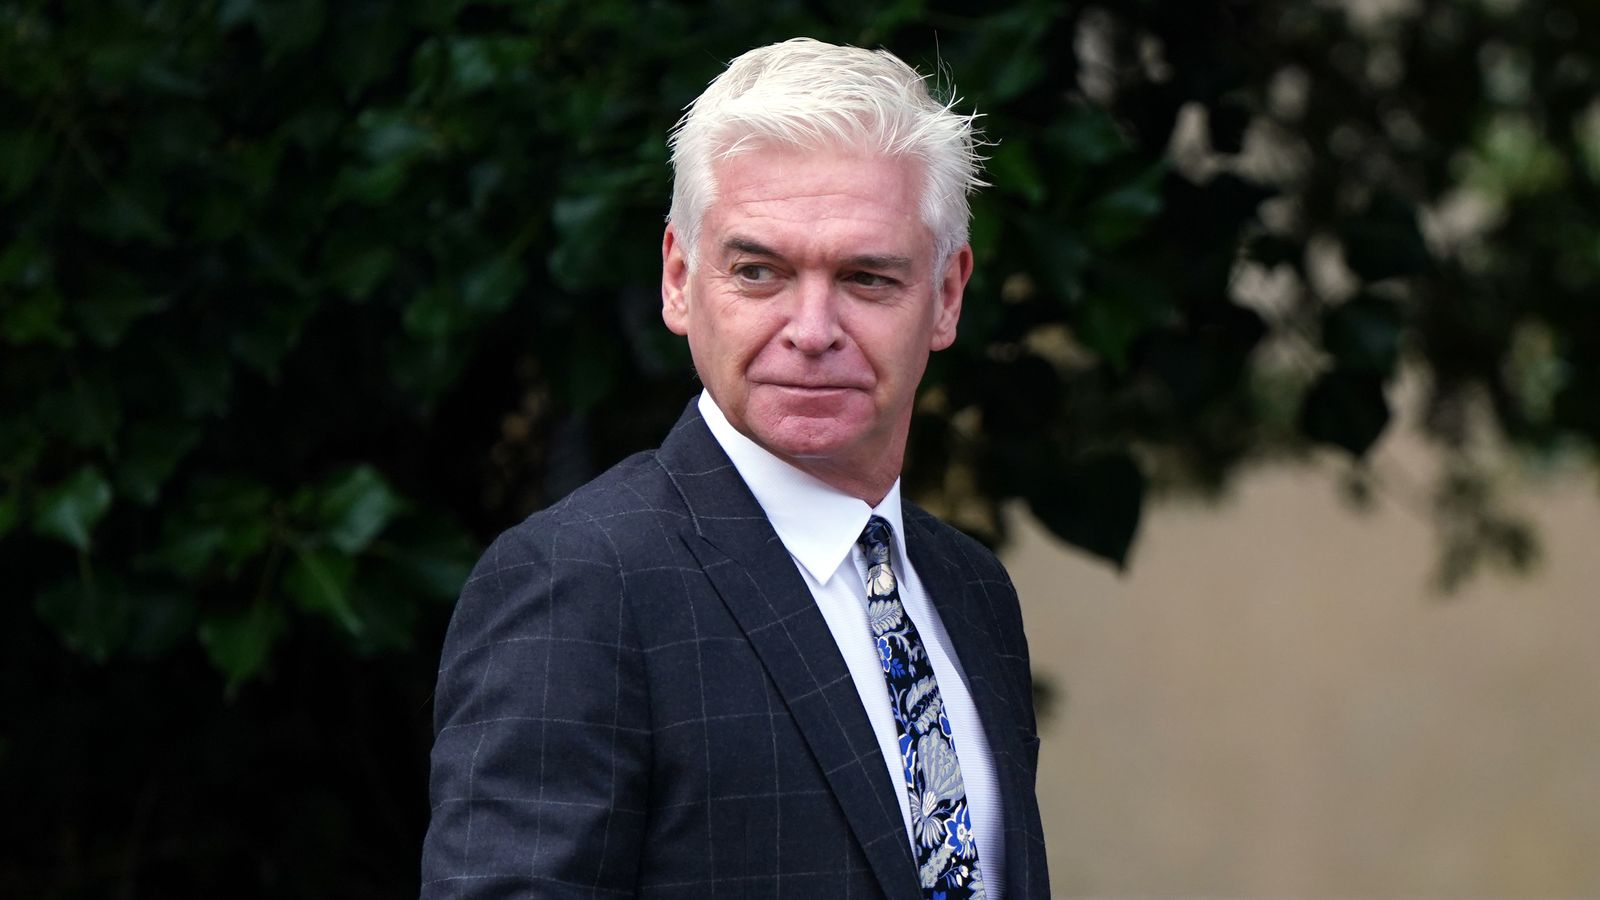 This Morning: Key extracts from ITV chief executive's letter to culture secretary on Phillip Schofield departure